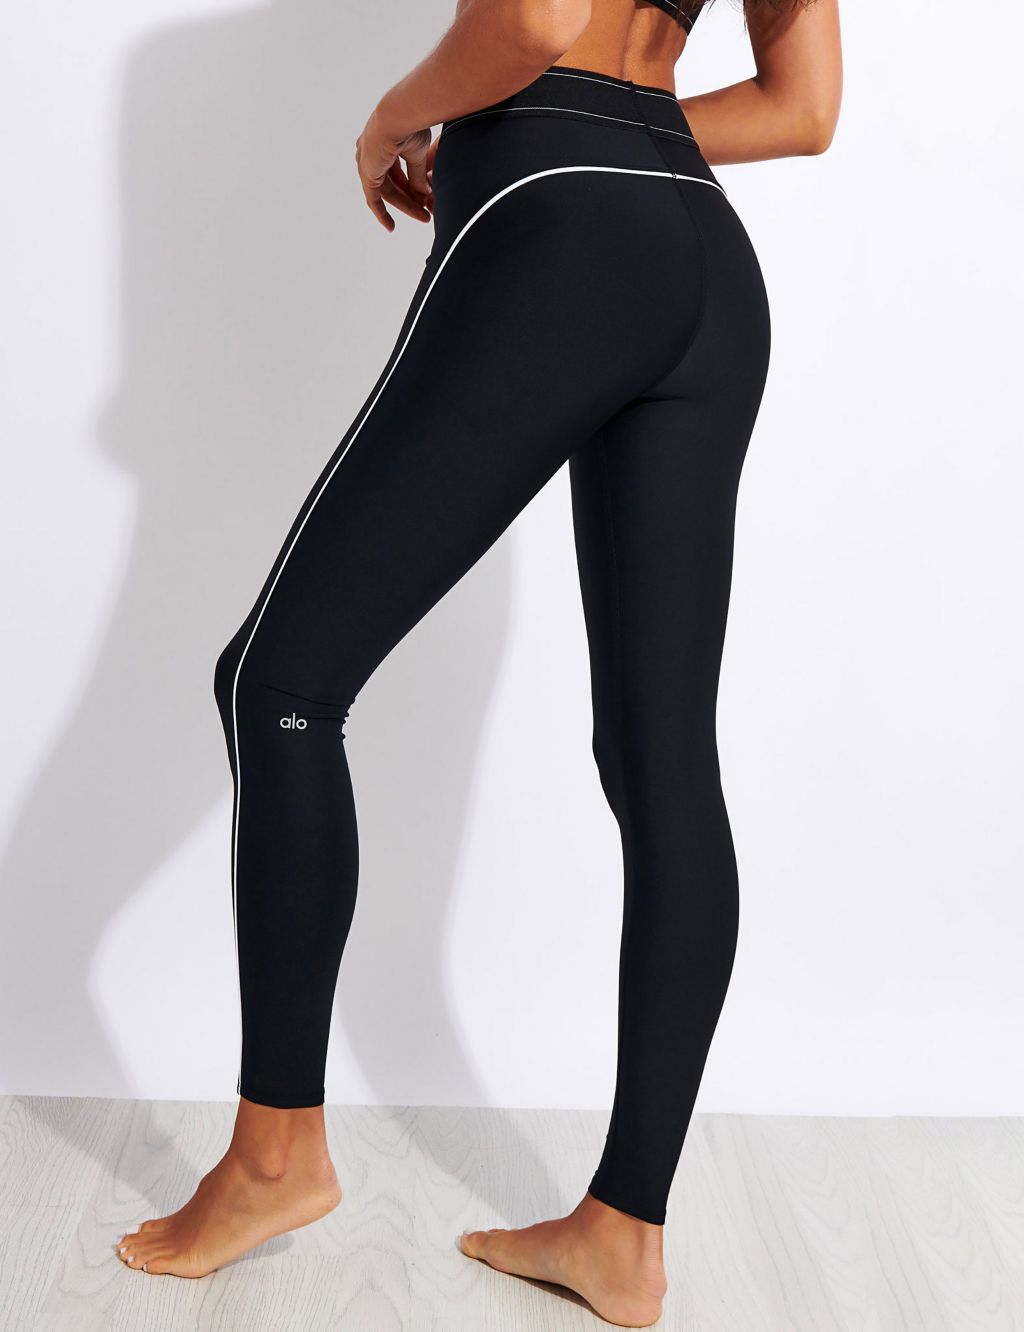 Airlift High Waisted Suit Up Leggings image 3